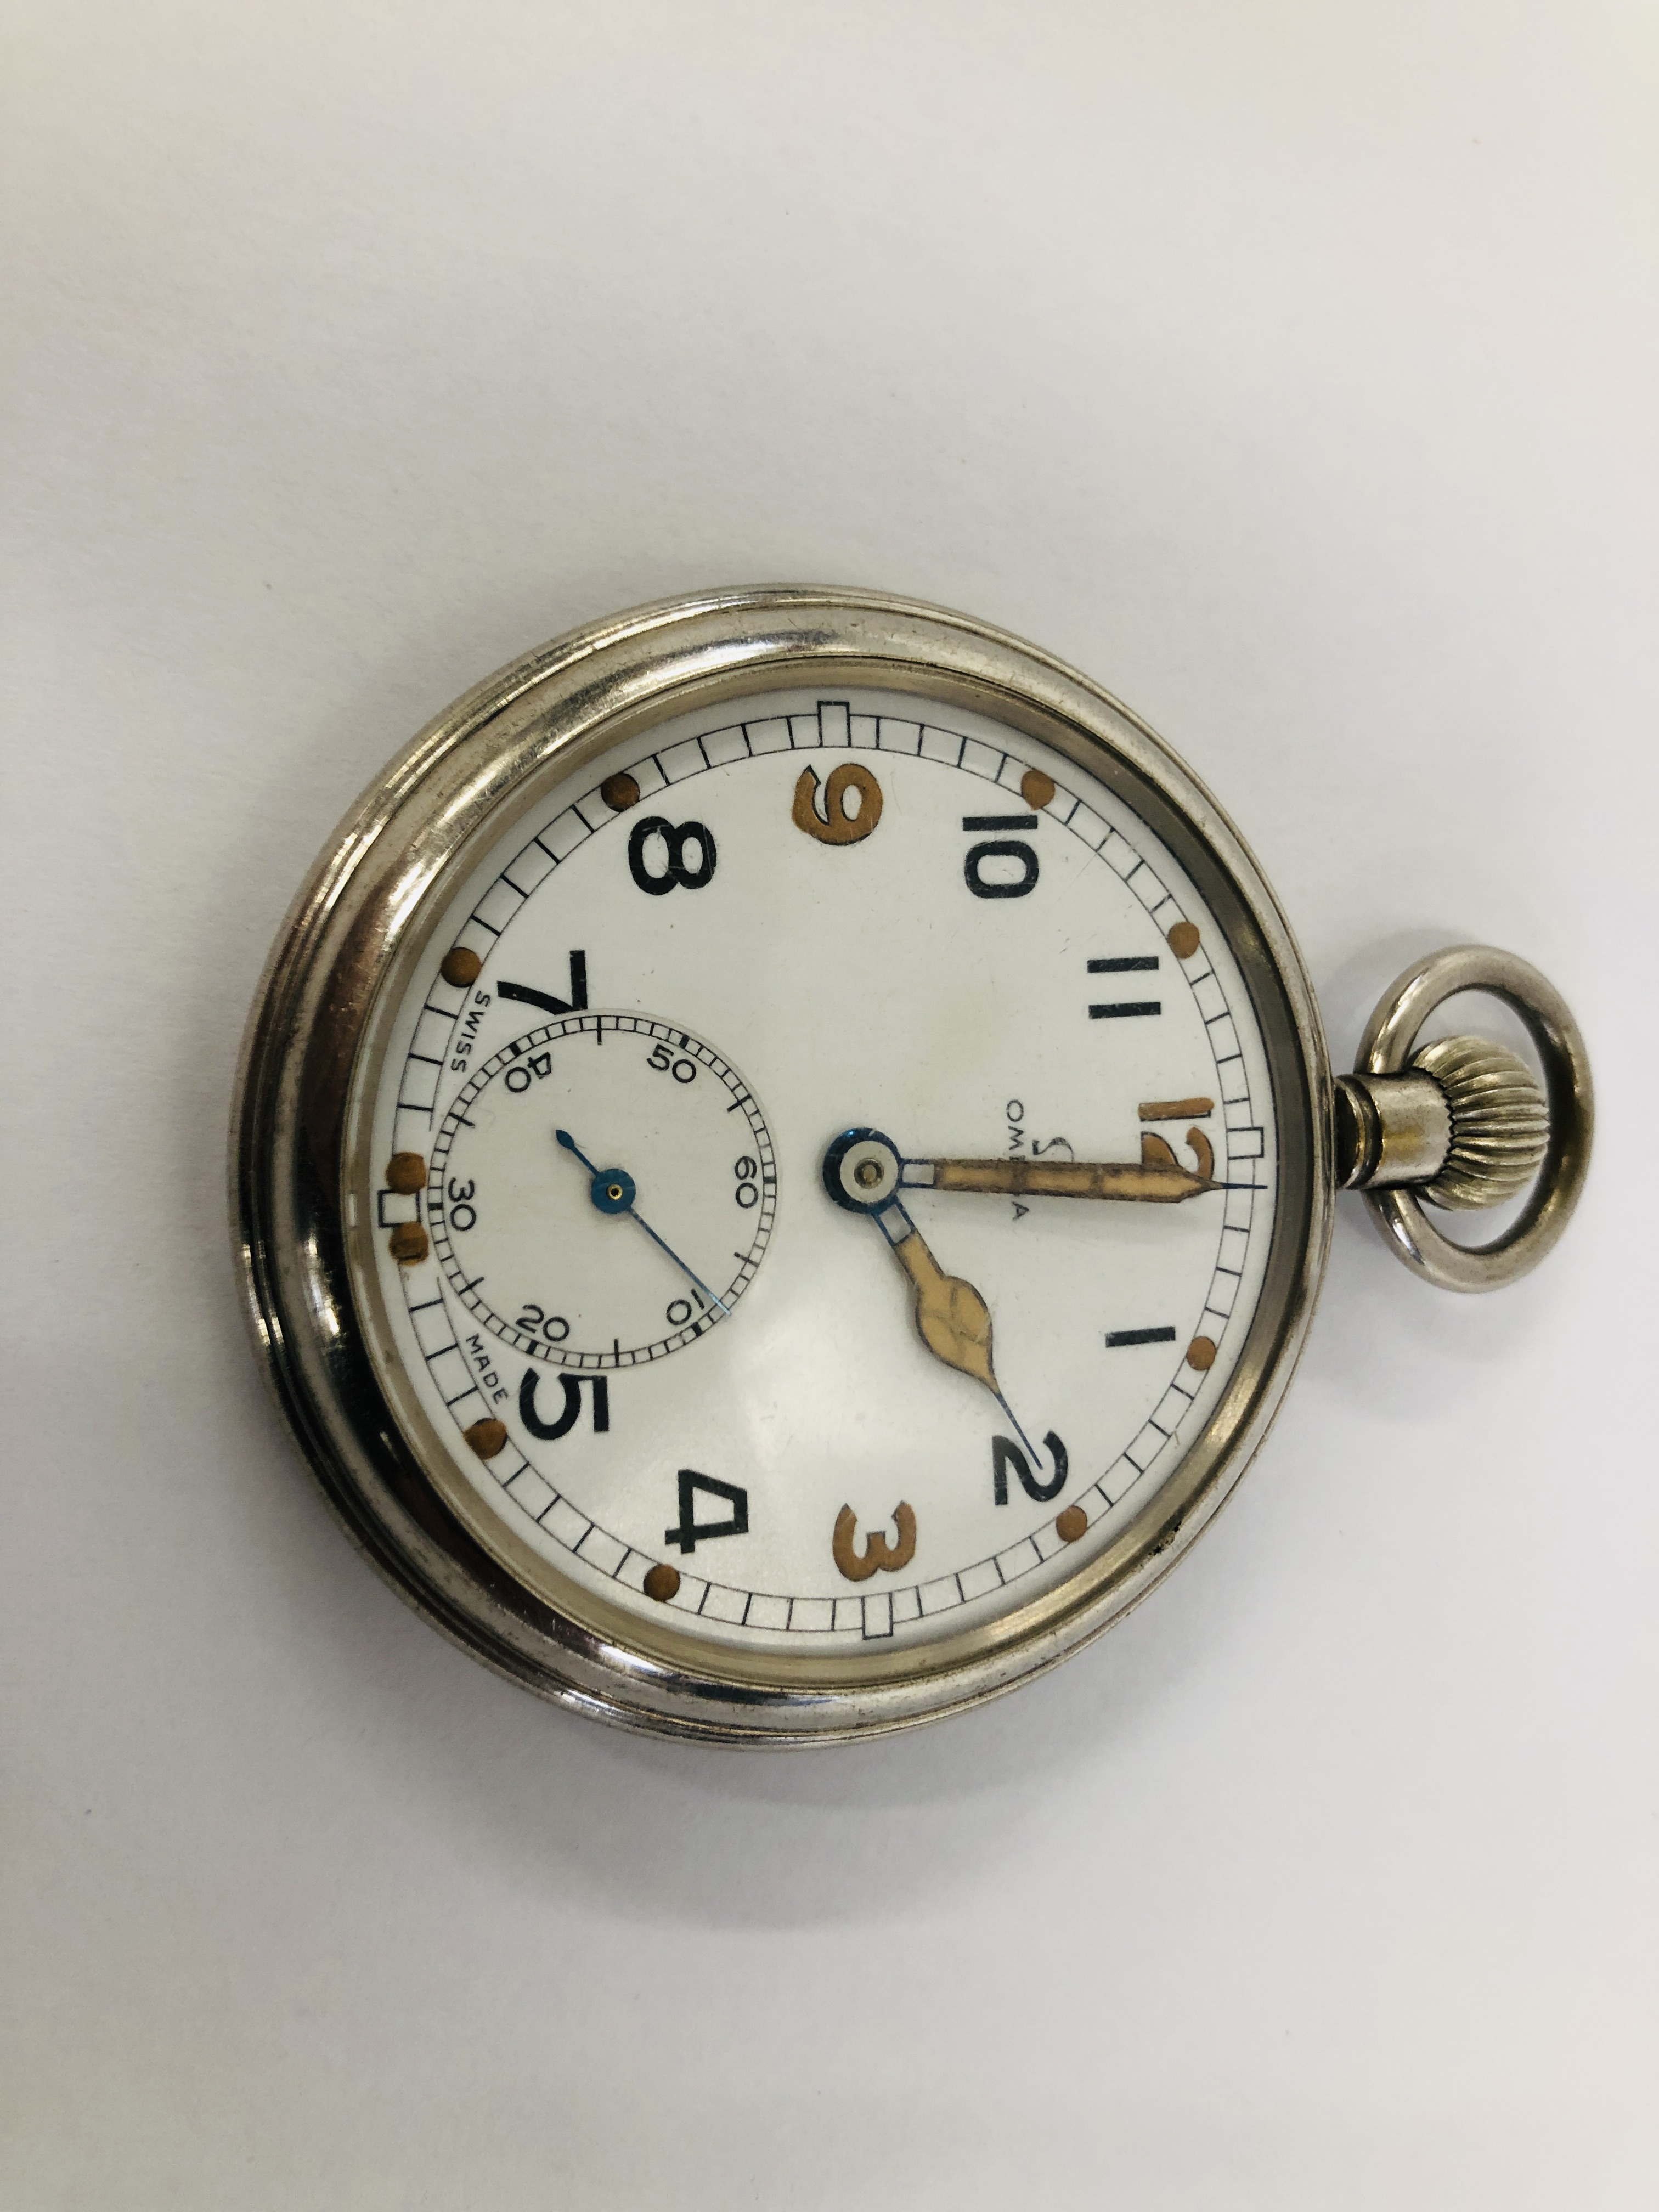 A VINTAGE MILITARY OMEGA POCKET WATCH G.S.T.P. FO51512. - Image 8 of 11